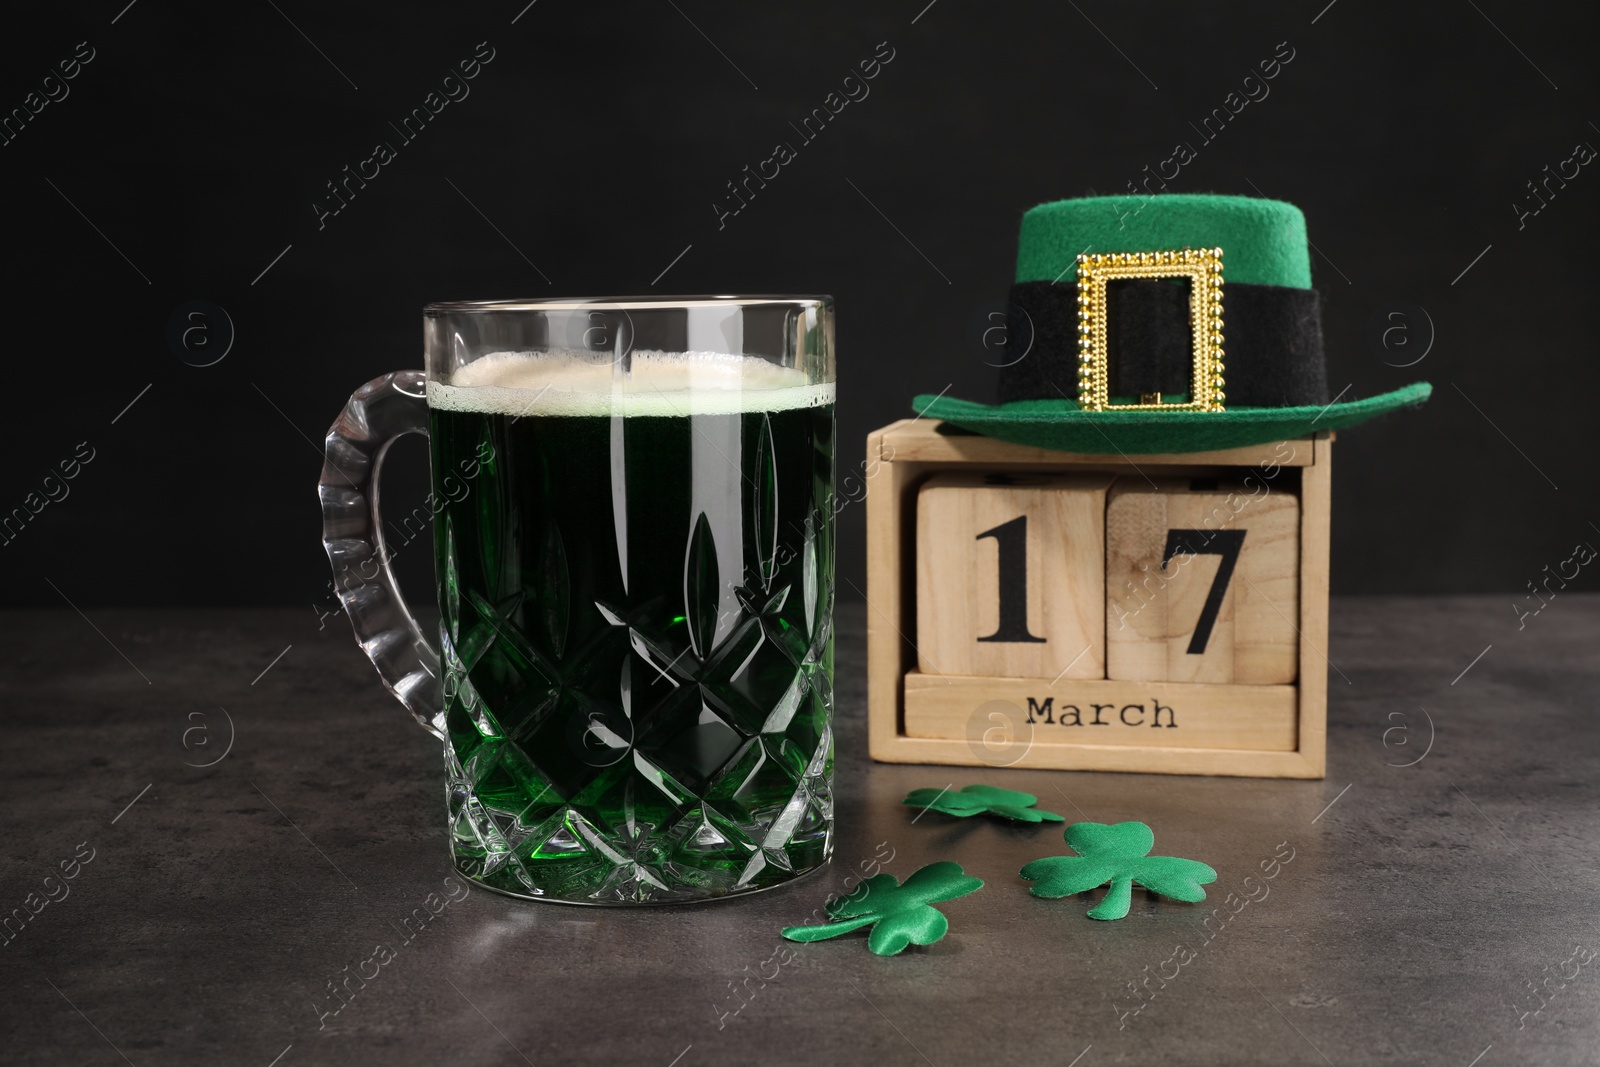 Photo of St. Patrick's day celebrating on March 17. Green beer, wooden block calendar, leprechaun hat and decorative clover leaves on grey table